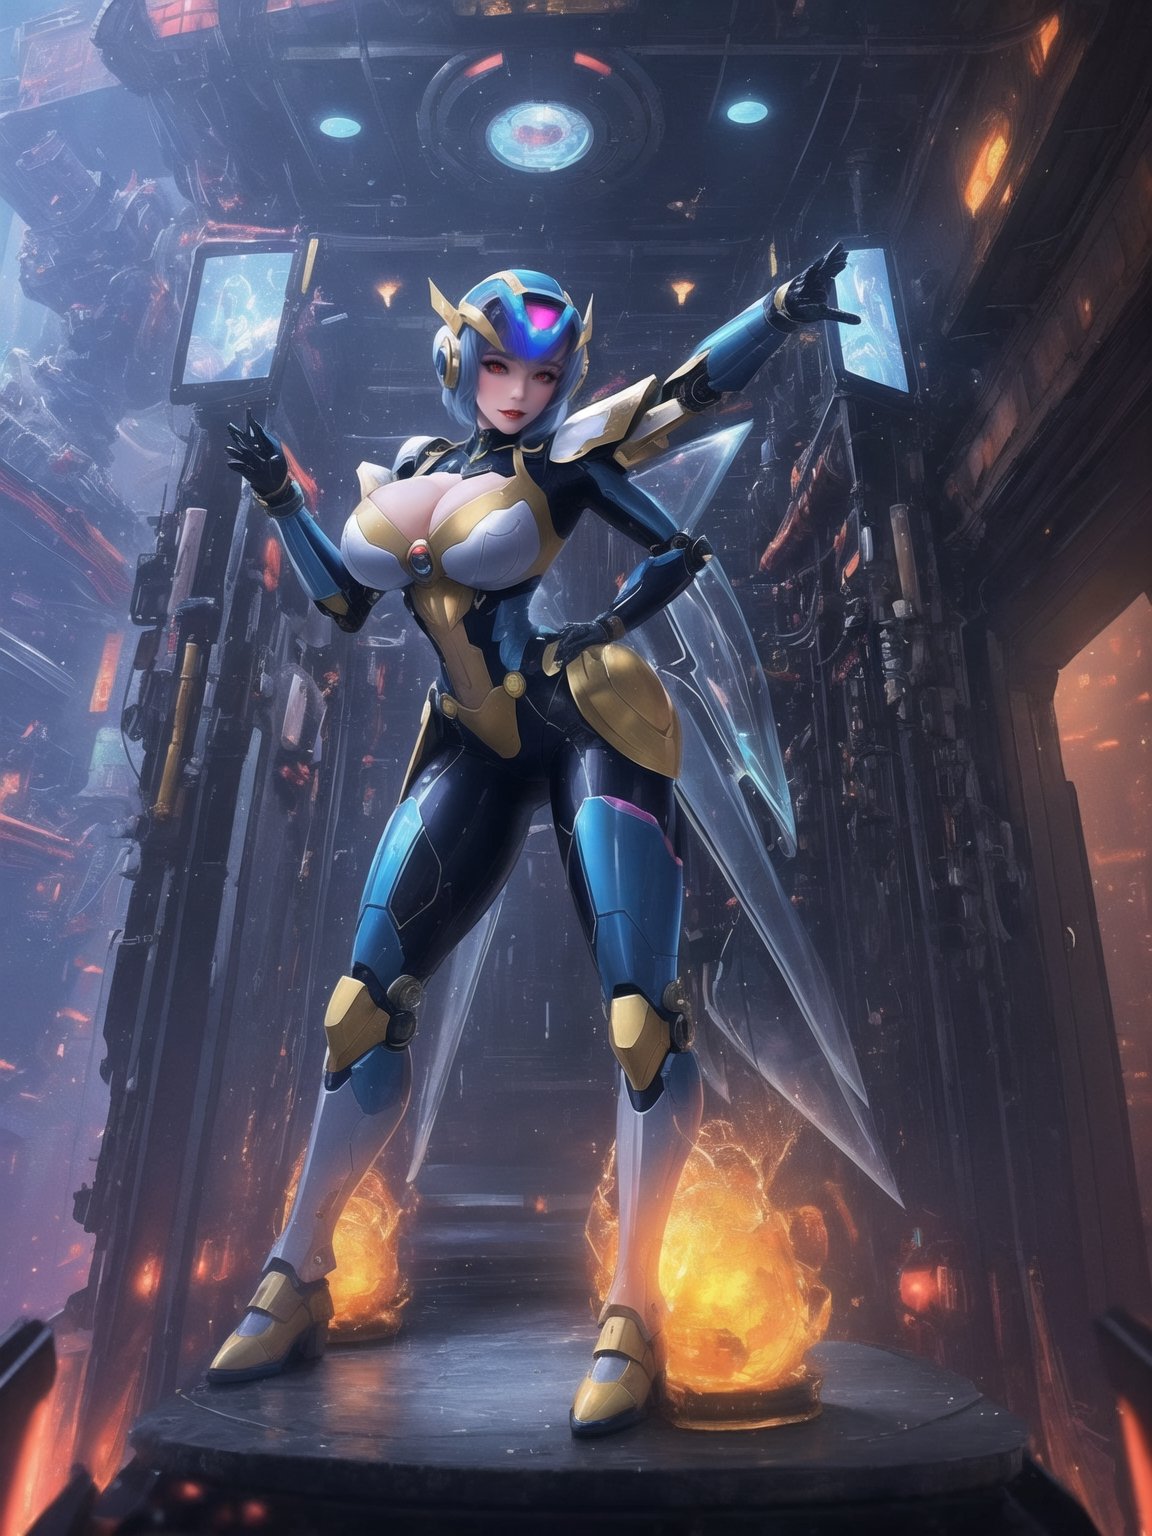 Ultra HD 16K resolution, blending Mega Man X and Super Metroid styles, offering maximum sharpness and exceptional quality. | On a futuristic aircraft, a stunning 30-year-old woman with short blue hair wears white robotic armor with blue and yellow details, standing out in the ultra-detailed scene. The cybernetic helmet frames her face, and she gazes directly at the viewer, intensifying the visual connection. | The composition, at a descending dynamic angle, highlights the woman's sensual pose as she interacts and leans on a large technological structure. Large machines, control panels, flying vehicles, and glass barrels containing luminous liquid create a futuristic environment. | Lighting effects enhance the sharpness of the armor, emphasizing the luminosity of the liquid in the barrels, creating an immersive sci-fi atmosphere. Large technological structures complete the scene, making it visually striking. | An impressive woman in a sensual pose on the futuristic aircraft, styled after Mega Man X and Super Metroid, interacting with the technological environment. | She: ((interacting and leaning on anything, very large structure+object, leaning against, sensual pose):1.3), ((Full body image)), perfect hand, fingers, hand, perfect, better_hands, More Detail.